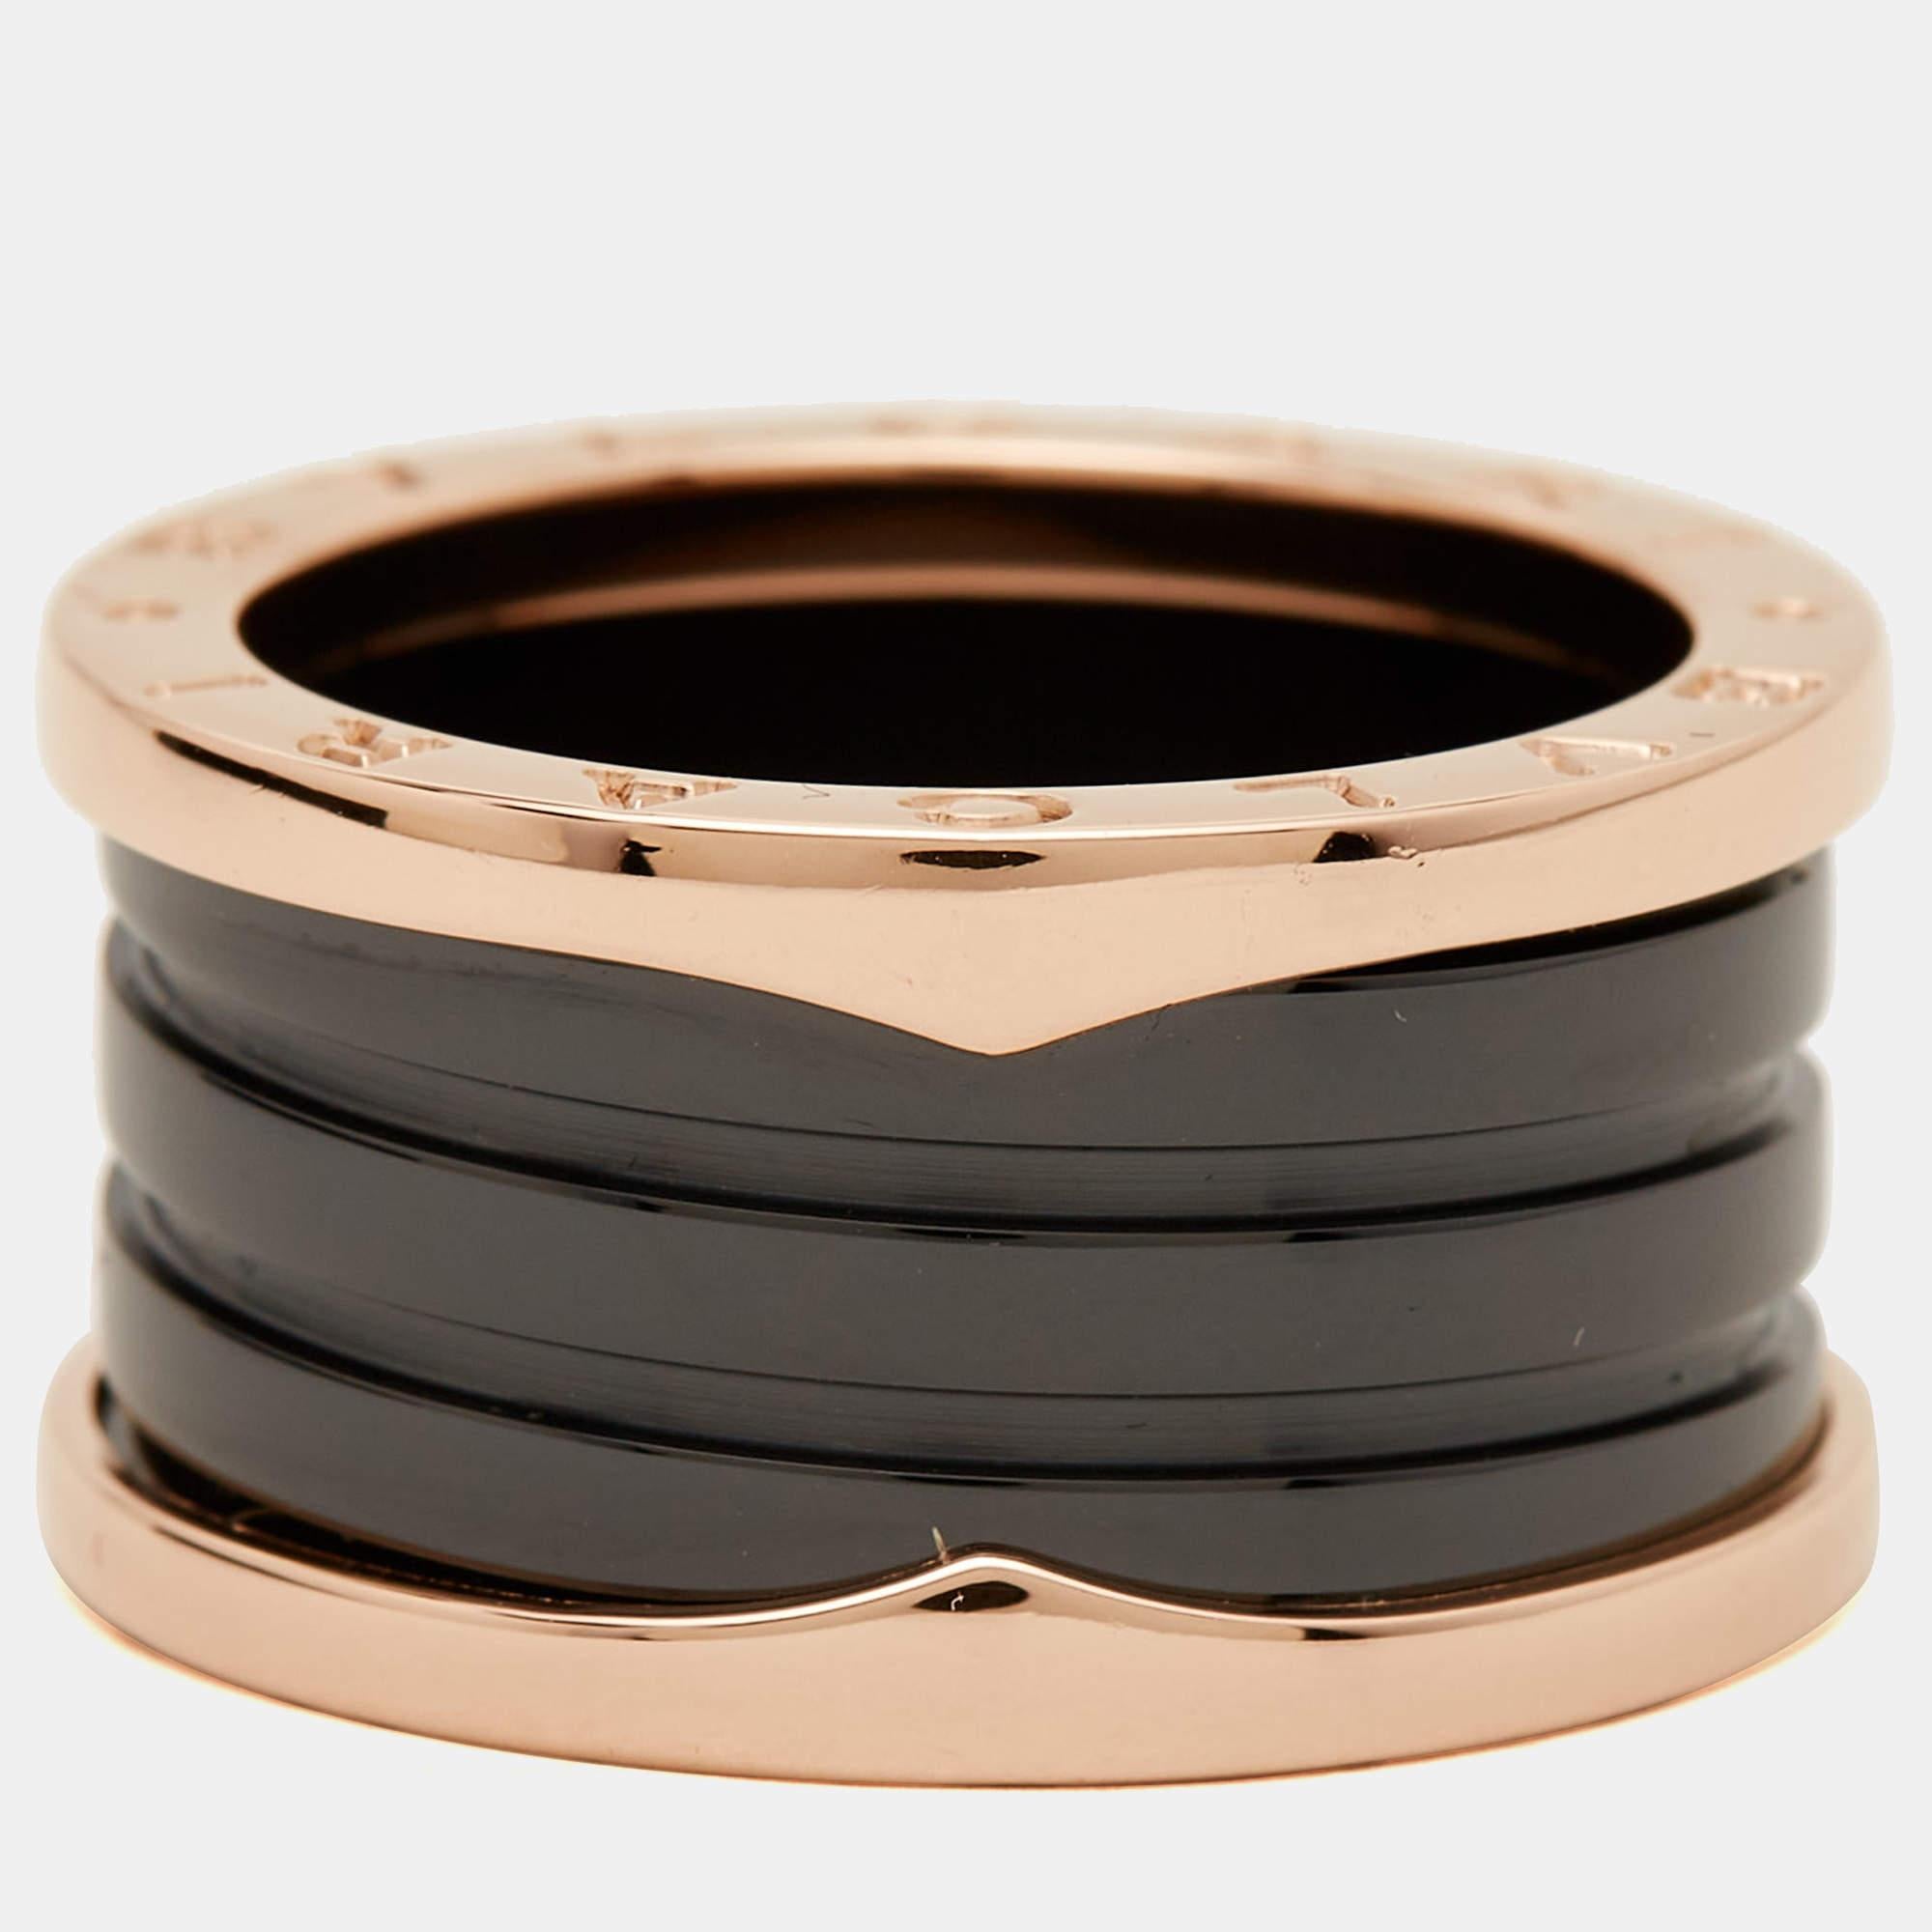 Unique and modern, this charming B.Zero1 band ring is from one of Bvlgari's iconic collections. Beautifully crafted from 18k rose gold and black ceramic, the ring has a stack of 4 bands. Inspired by the Colosseum, this ring merges exceptional